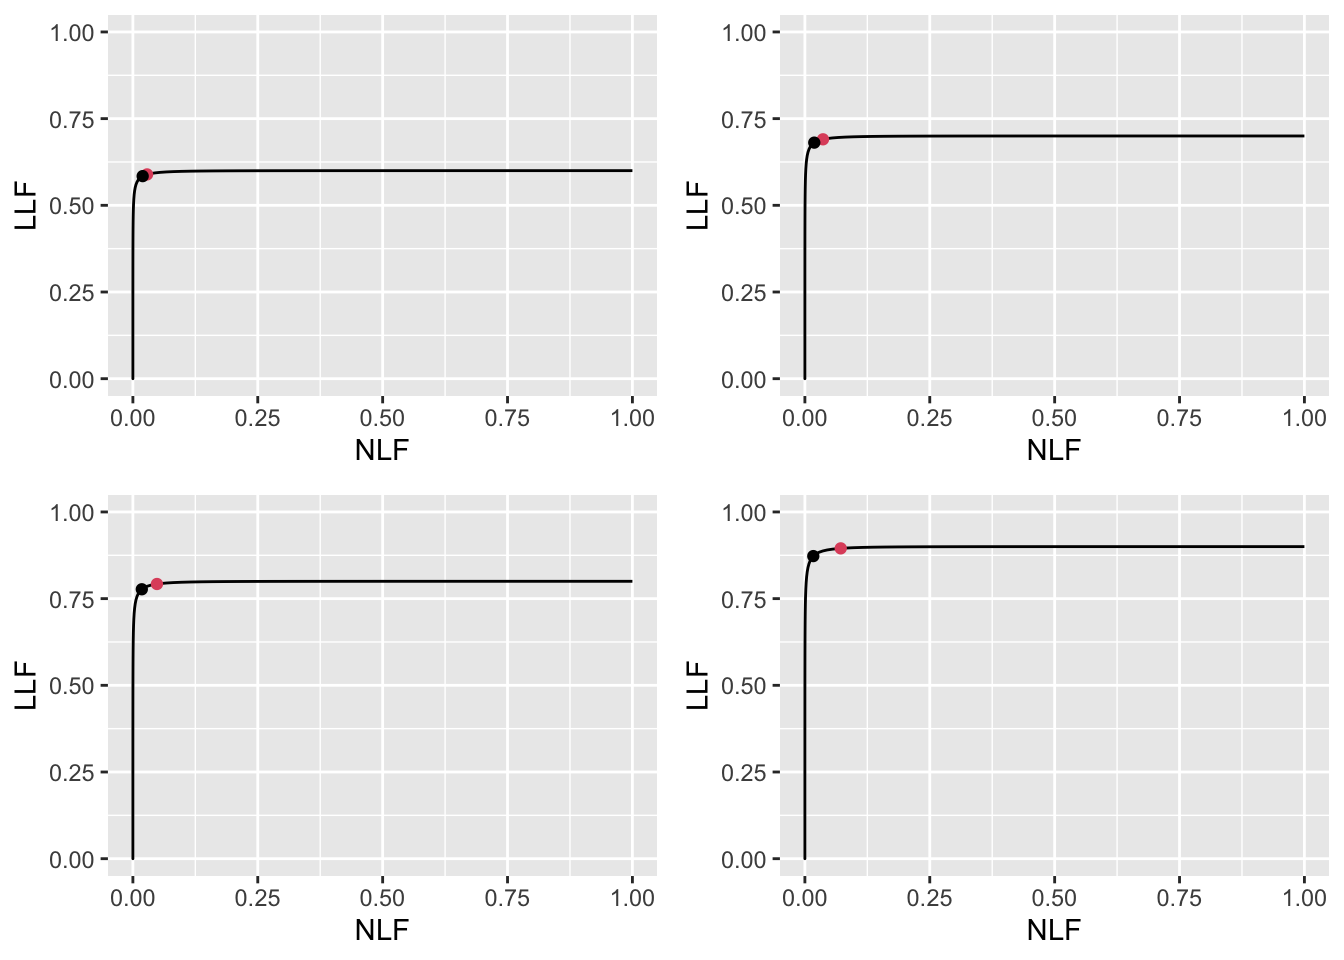 High performance varying $\nu$ FROC plots with superimposed operating points. The red dot corresponds to $\text{wAFROC}_\text{AUC}$ optimization and the black dot to Youden-index optimization. The values of $\nu$ are: top-left $\nu = 0.6$, top-right $\nu = 0.7$, bottom-left $\nu = 0.8$ and bottom-right $\nu = 0.9$.